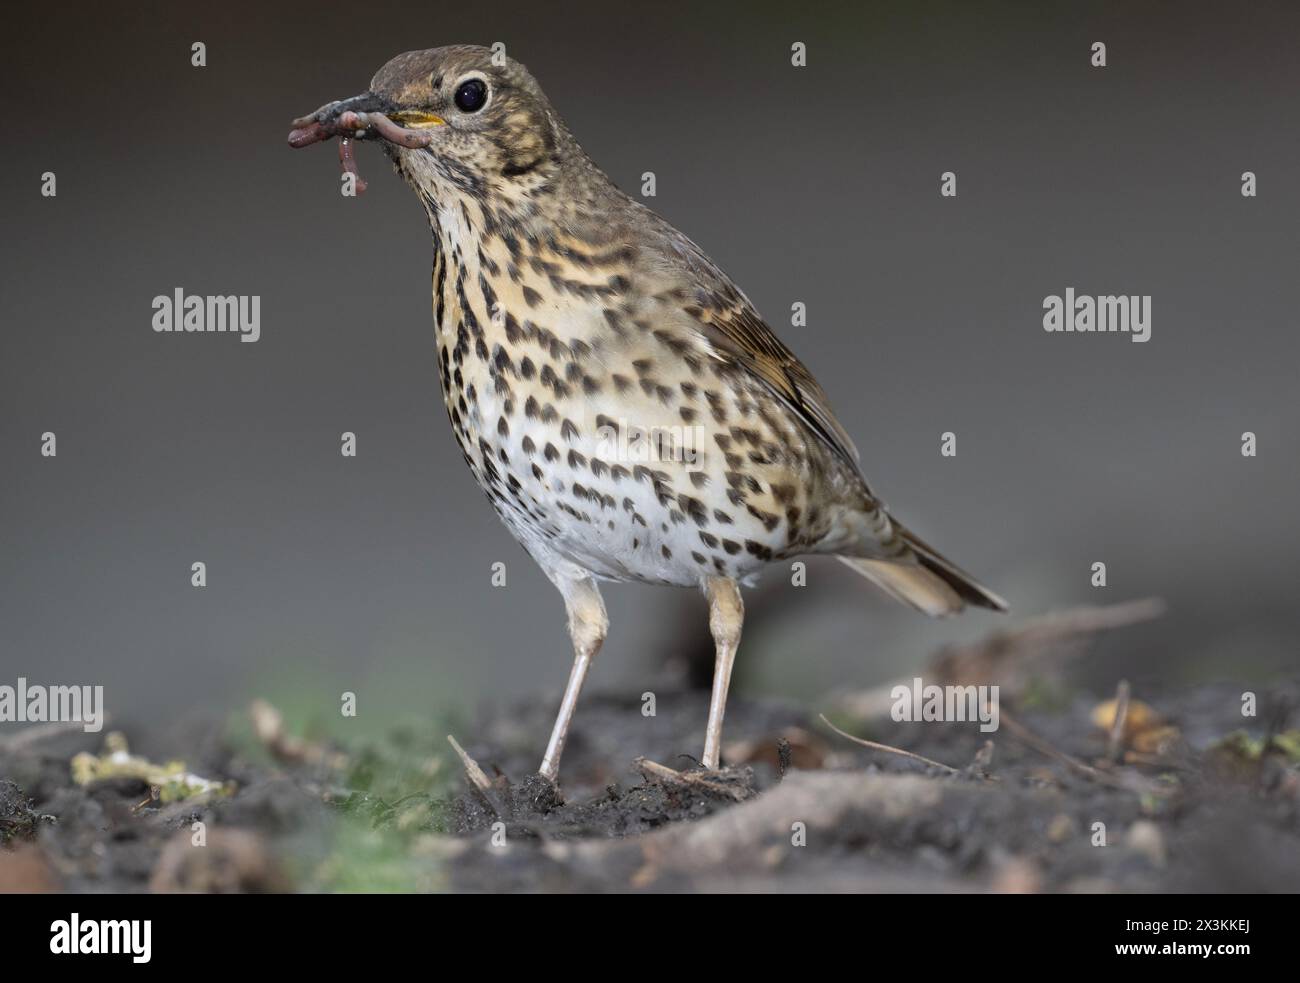 Adult Song Thrush, Turdus philomelos,  with worm in its beak, Queen's Park, London, United Kingdom Stock Photo